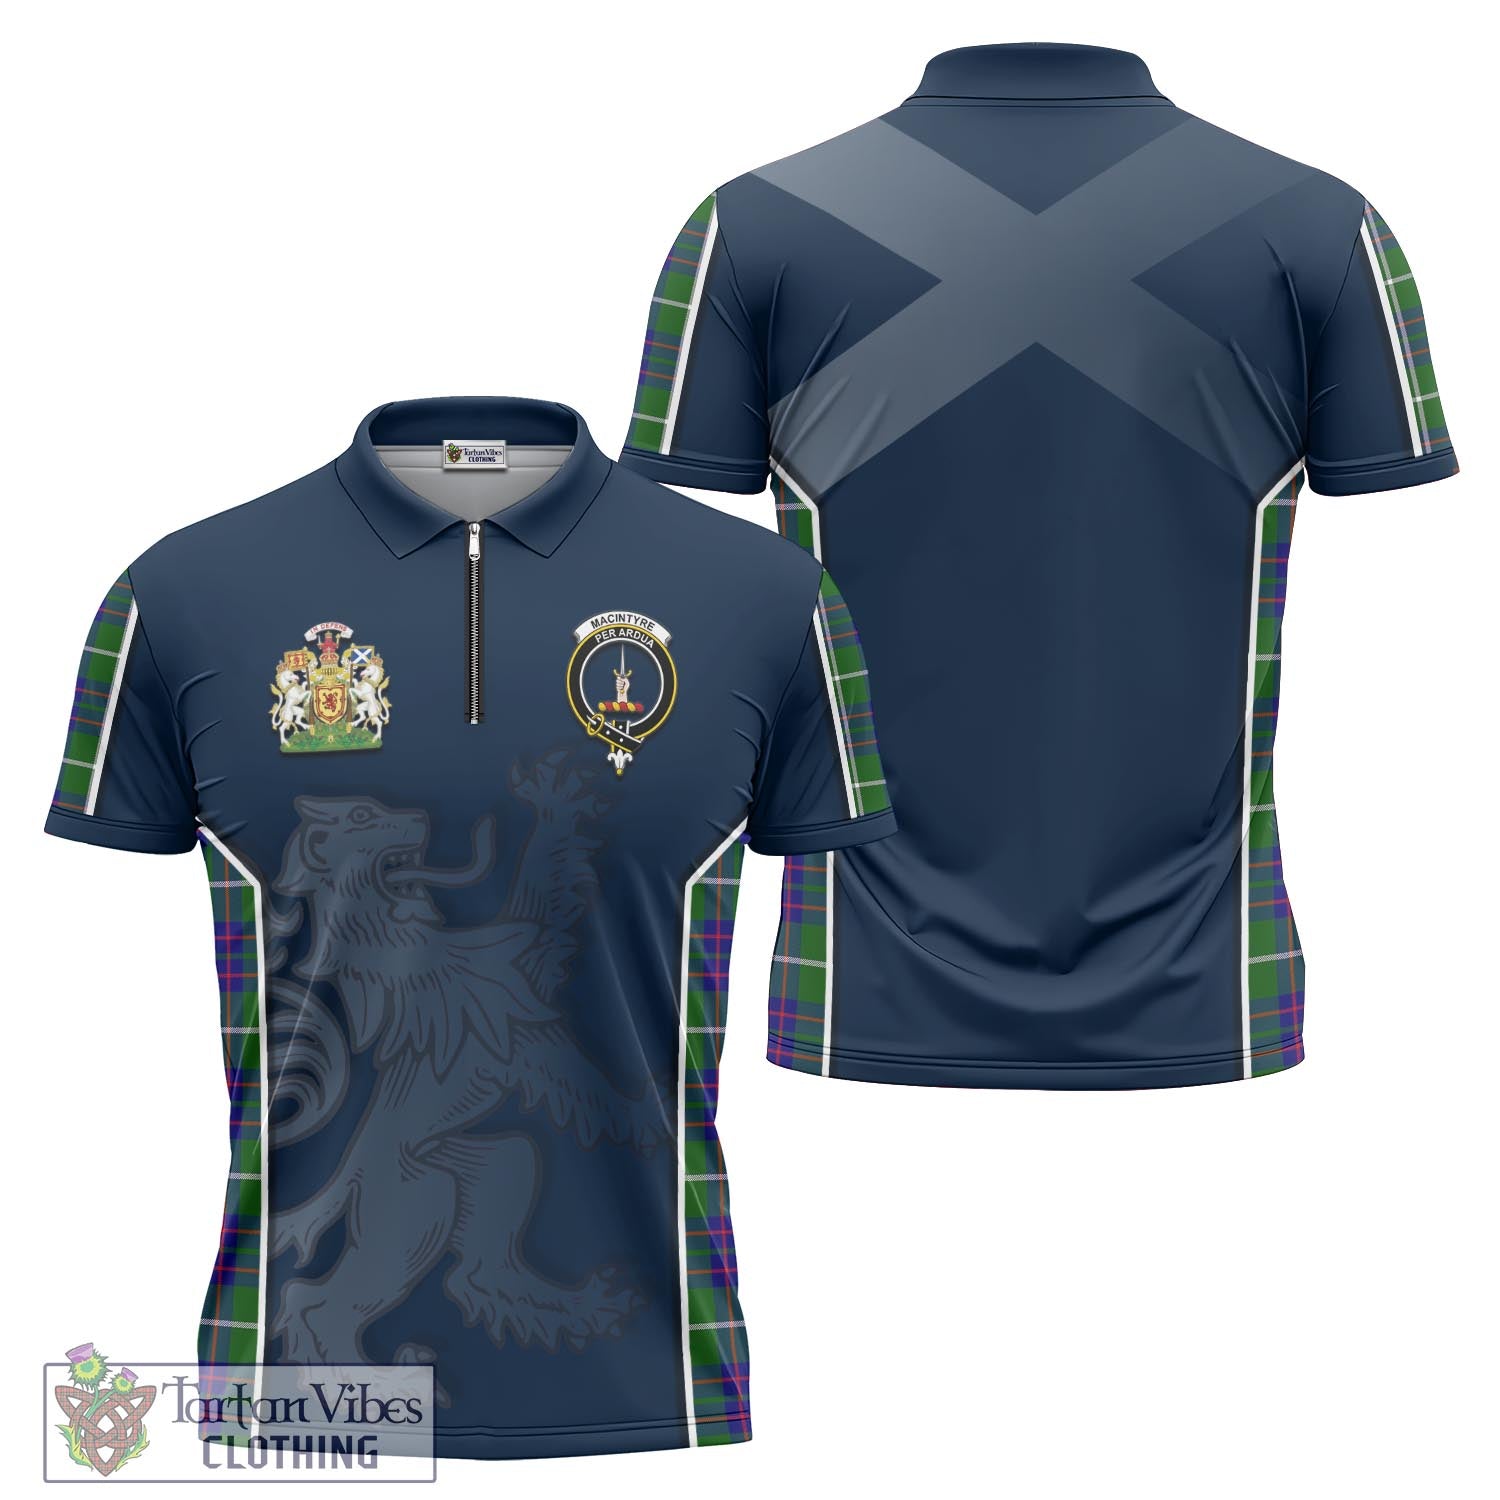 Tartan Vibes Clothing MacIntyre Hunting Modern Tartan Zipper Polo Shirt with Family Crest and Lion Rampant Vibes Sport Style